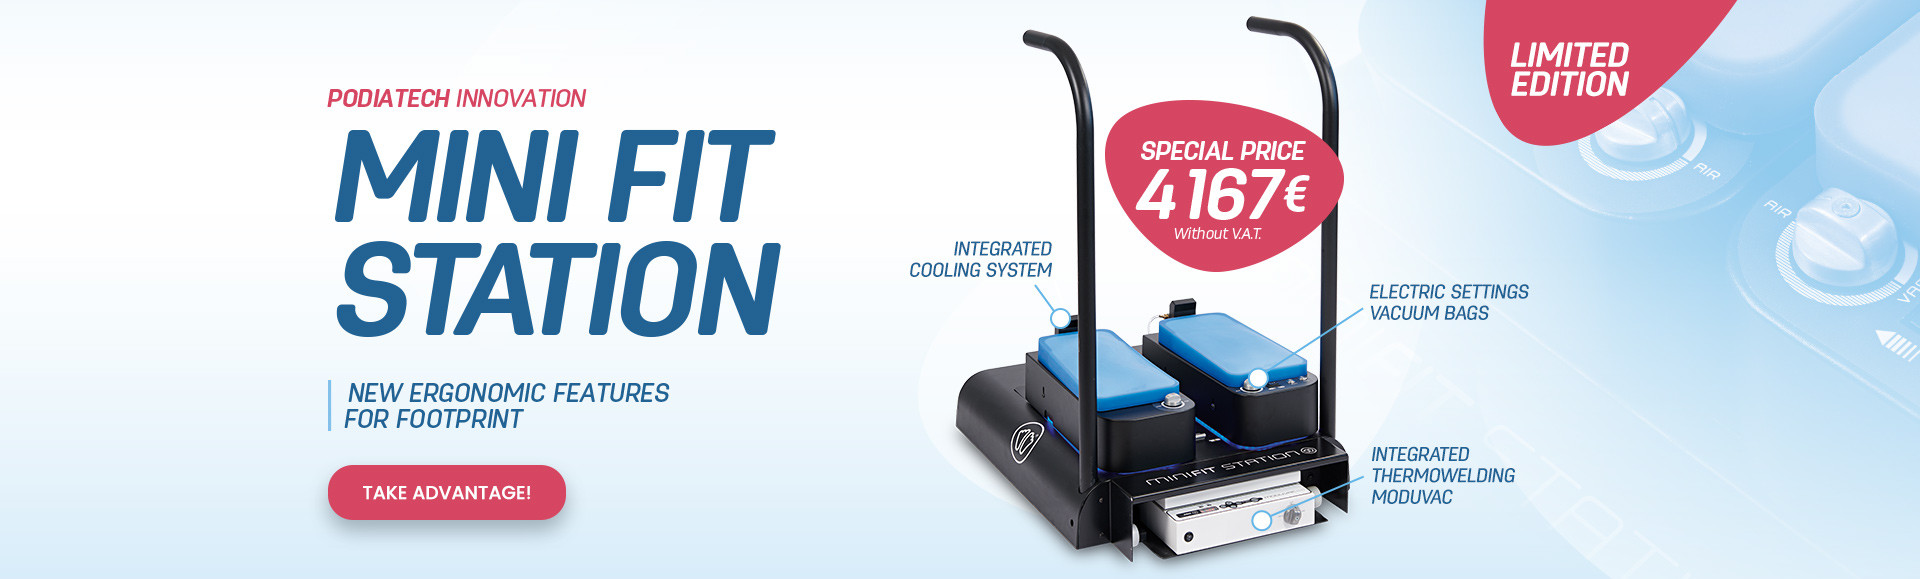 special price mini fit station